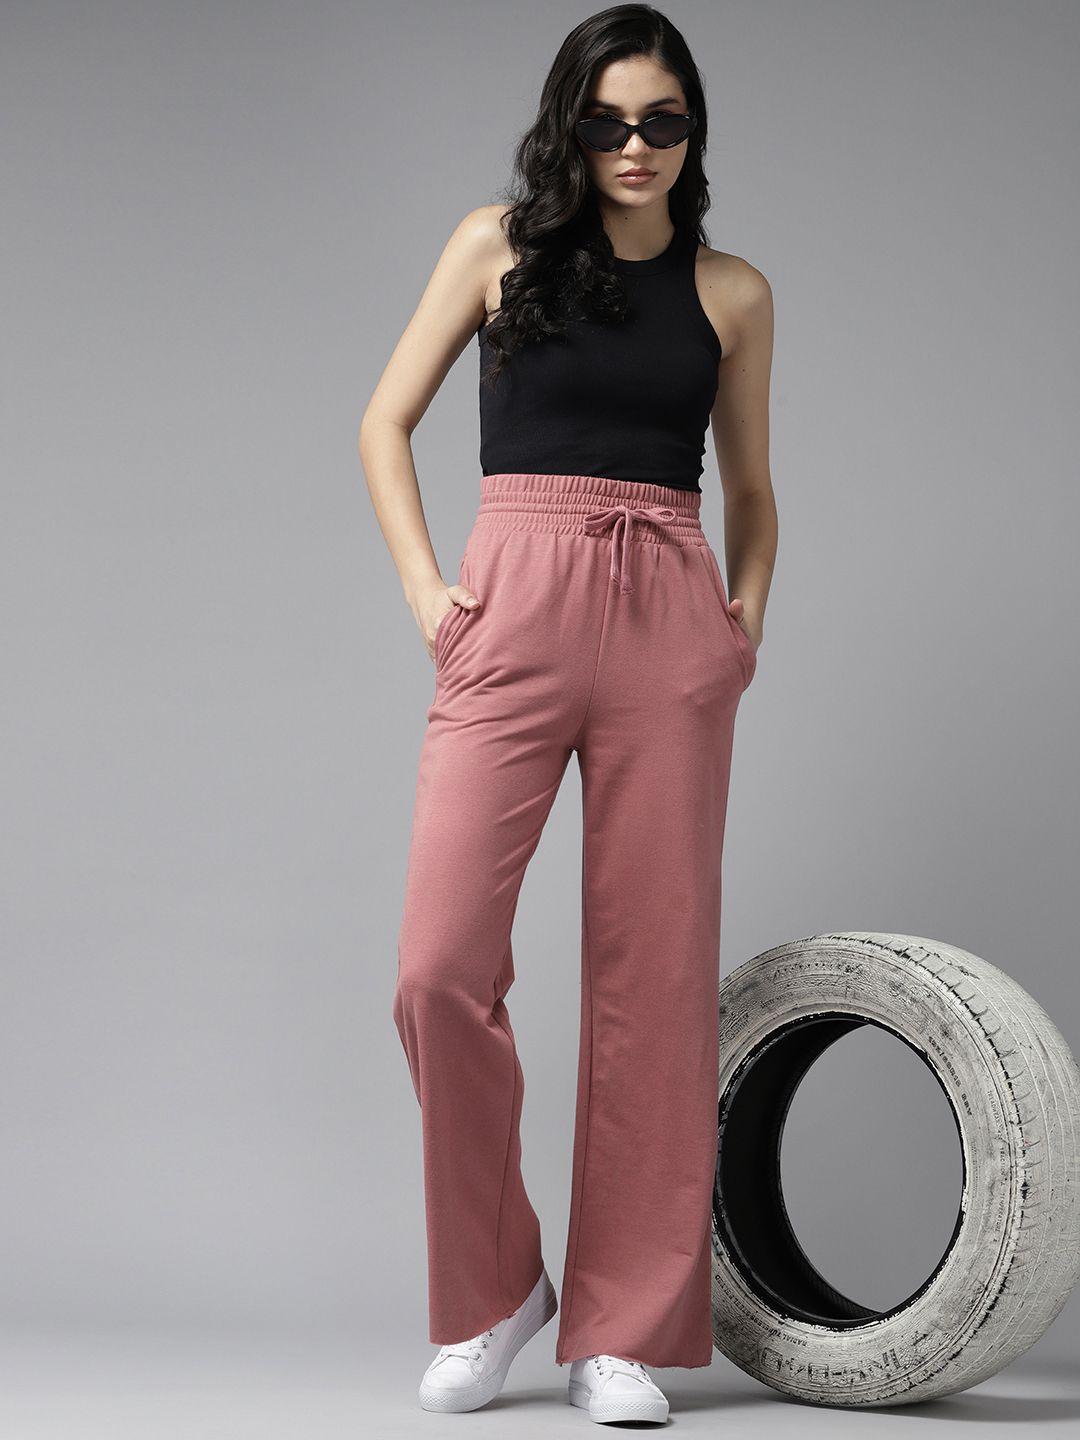 the-roadster-lifestyle-co.-women-wide-leg-track-pants